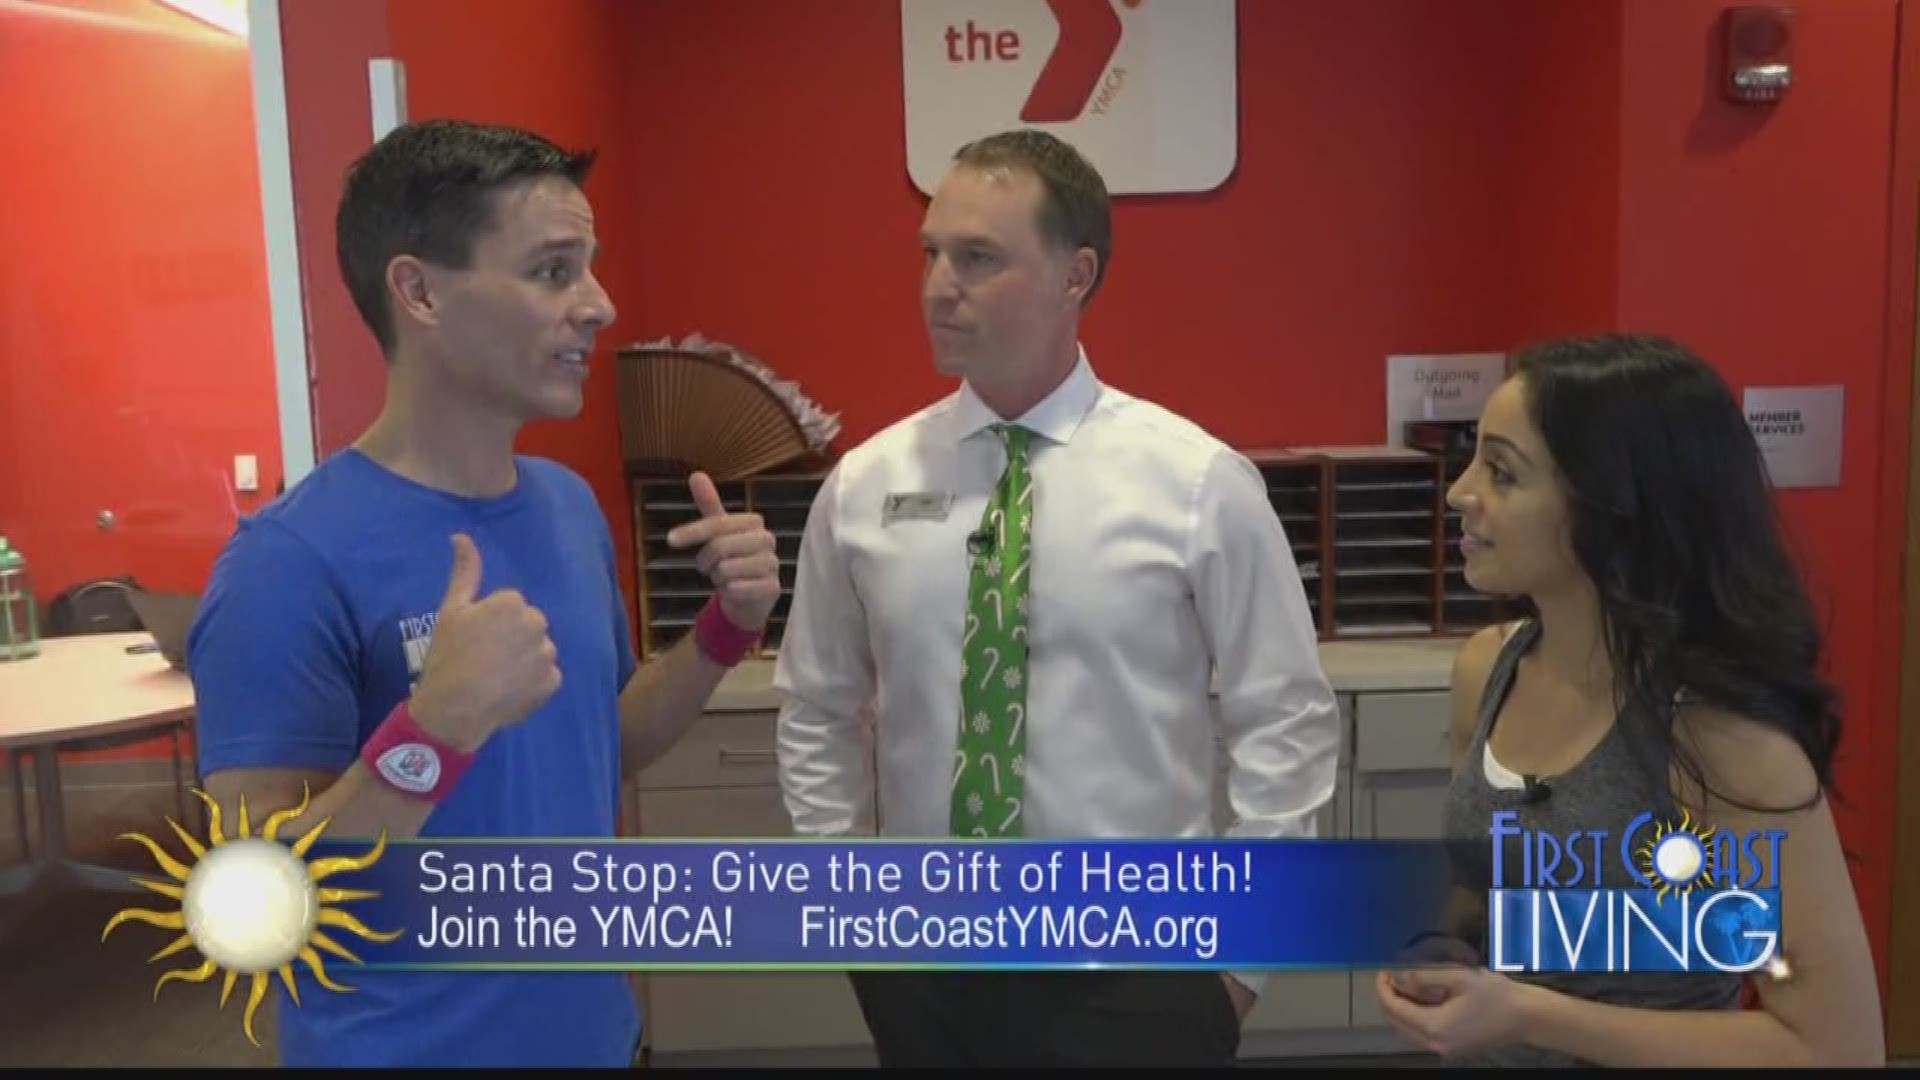 Looking to get fit in the new year? Curtis and Haddie made a stop at First Coast YMCA to see what they have to offer in another Santa Stop.